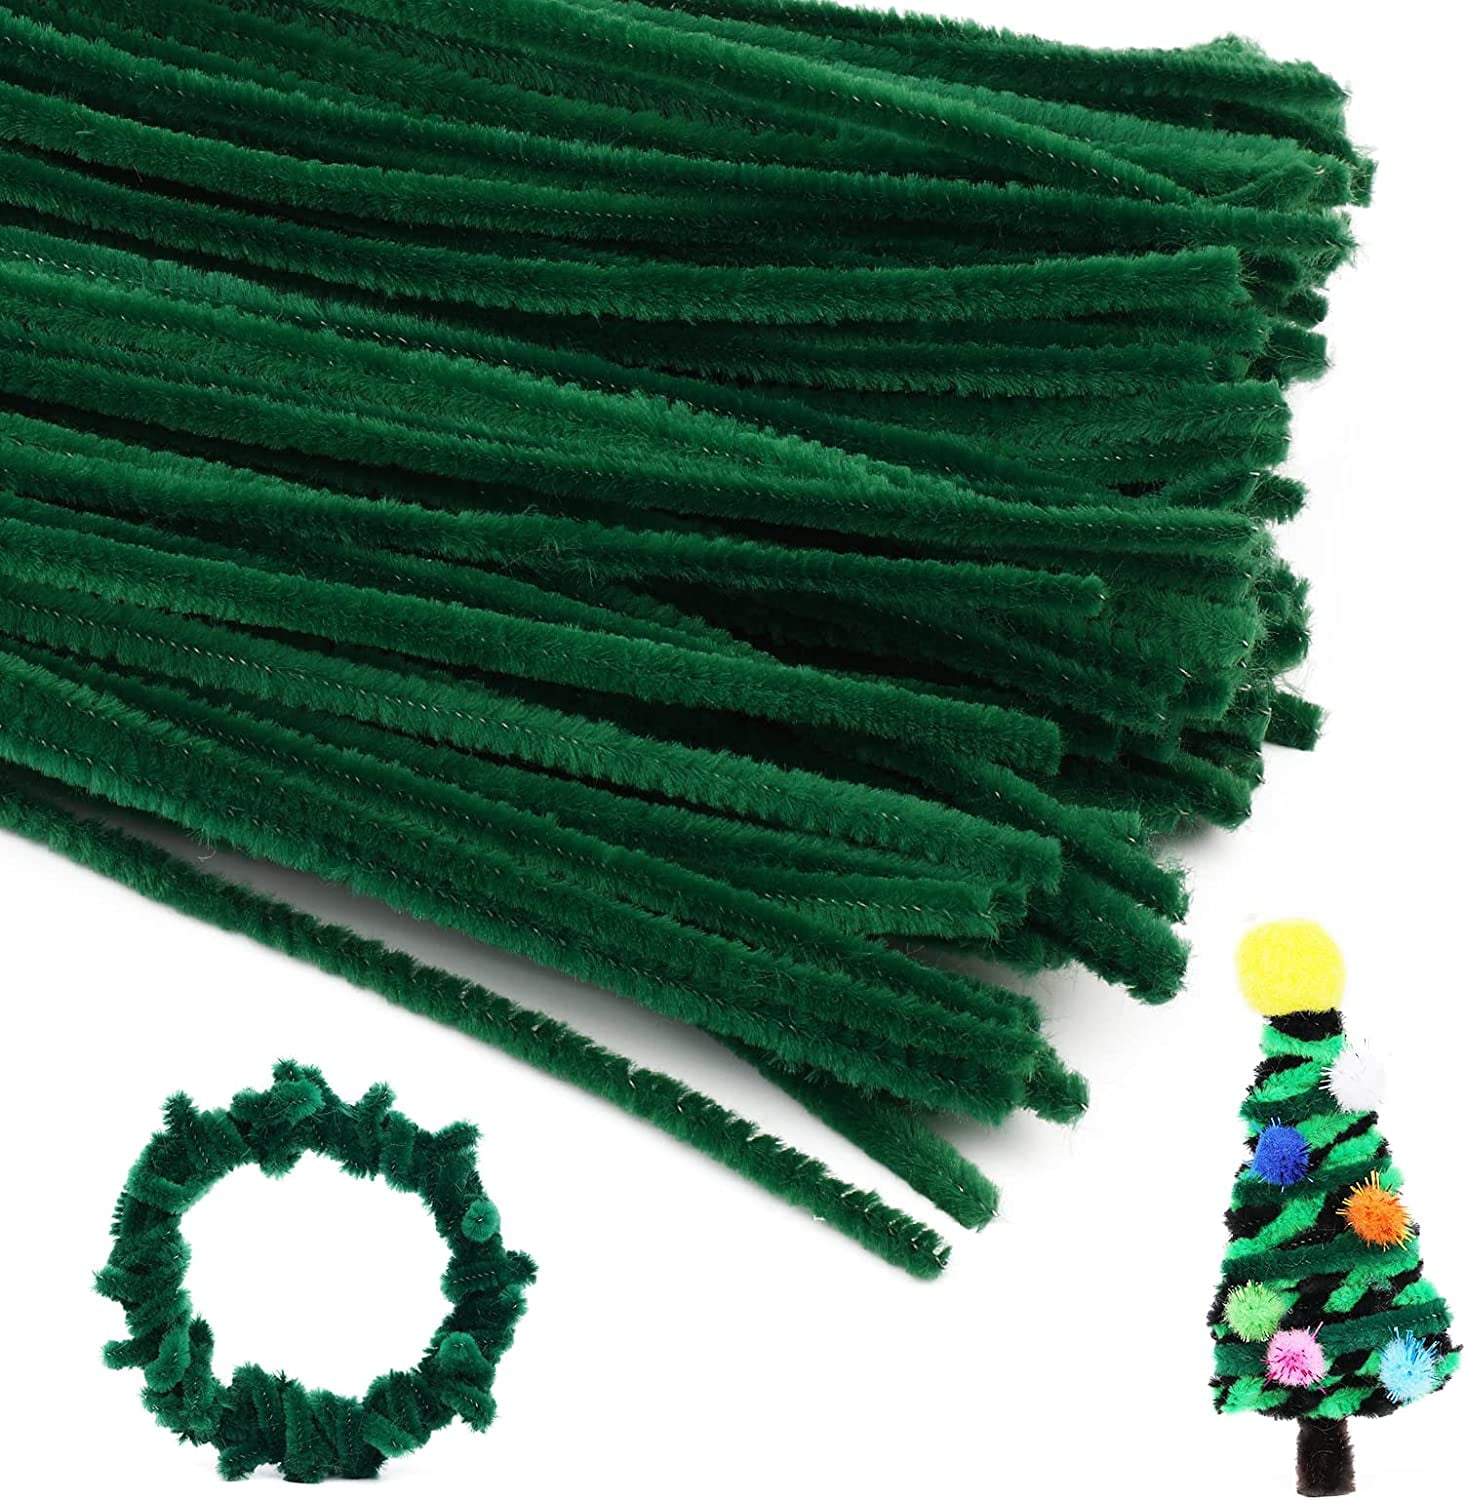 150Pcs Christmas Pipe Cleaners Craft Set Including 50Pcs Green Chenille  Stems, 50Pcs White Chenille Stems, and 50Pcs Red Pipe Cleaners for DIY  Crafts